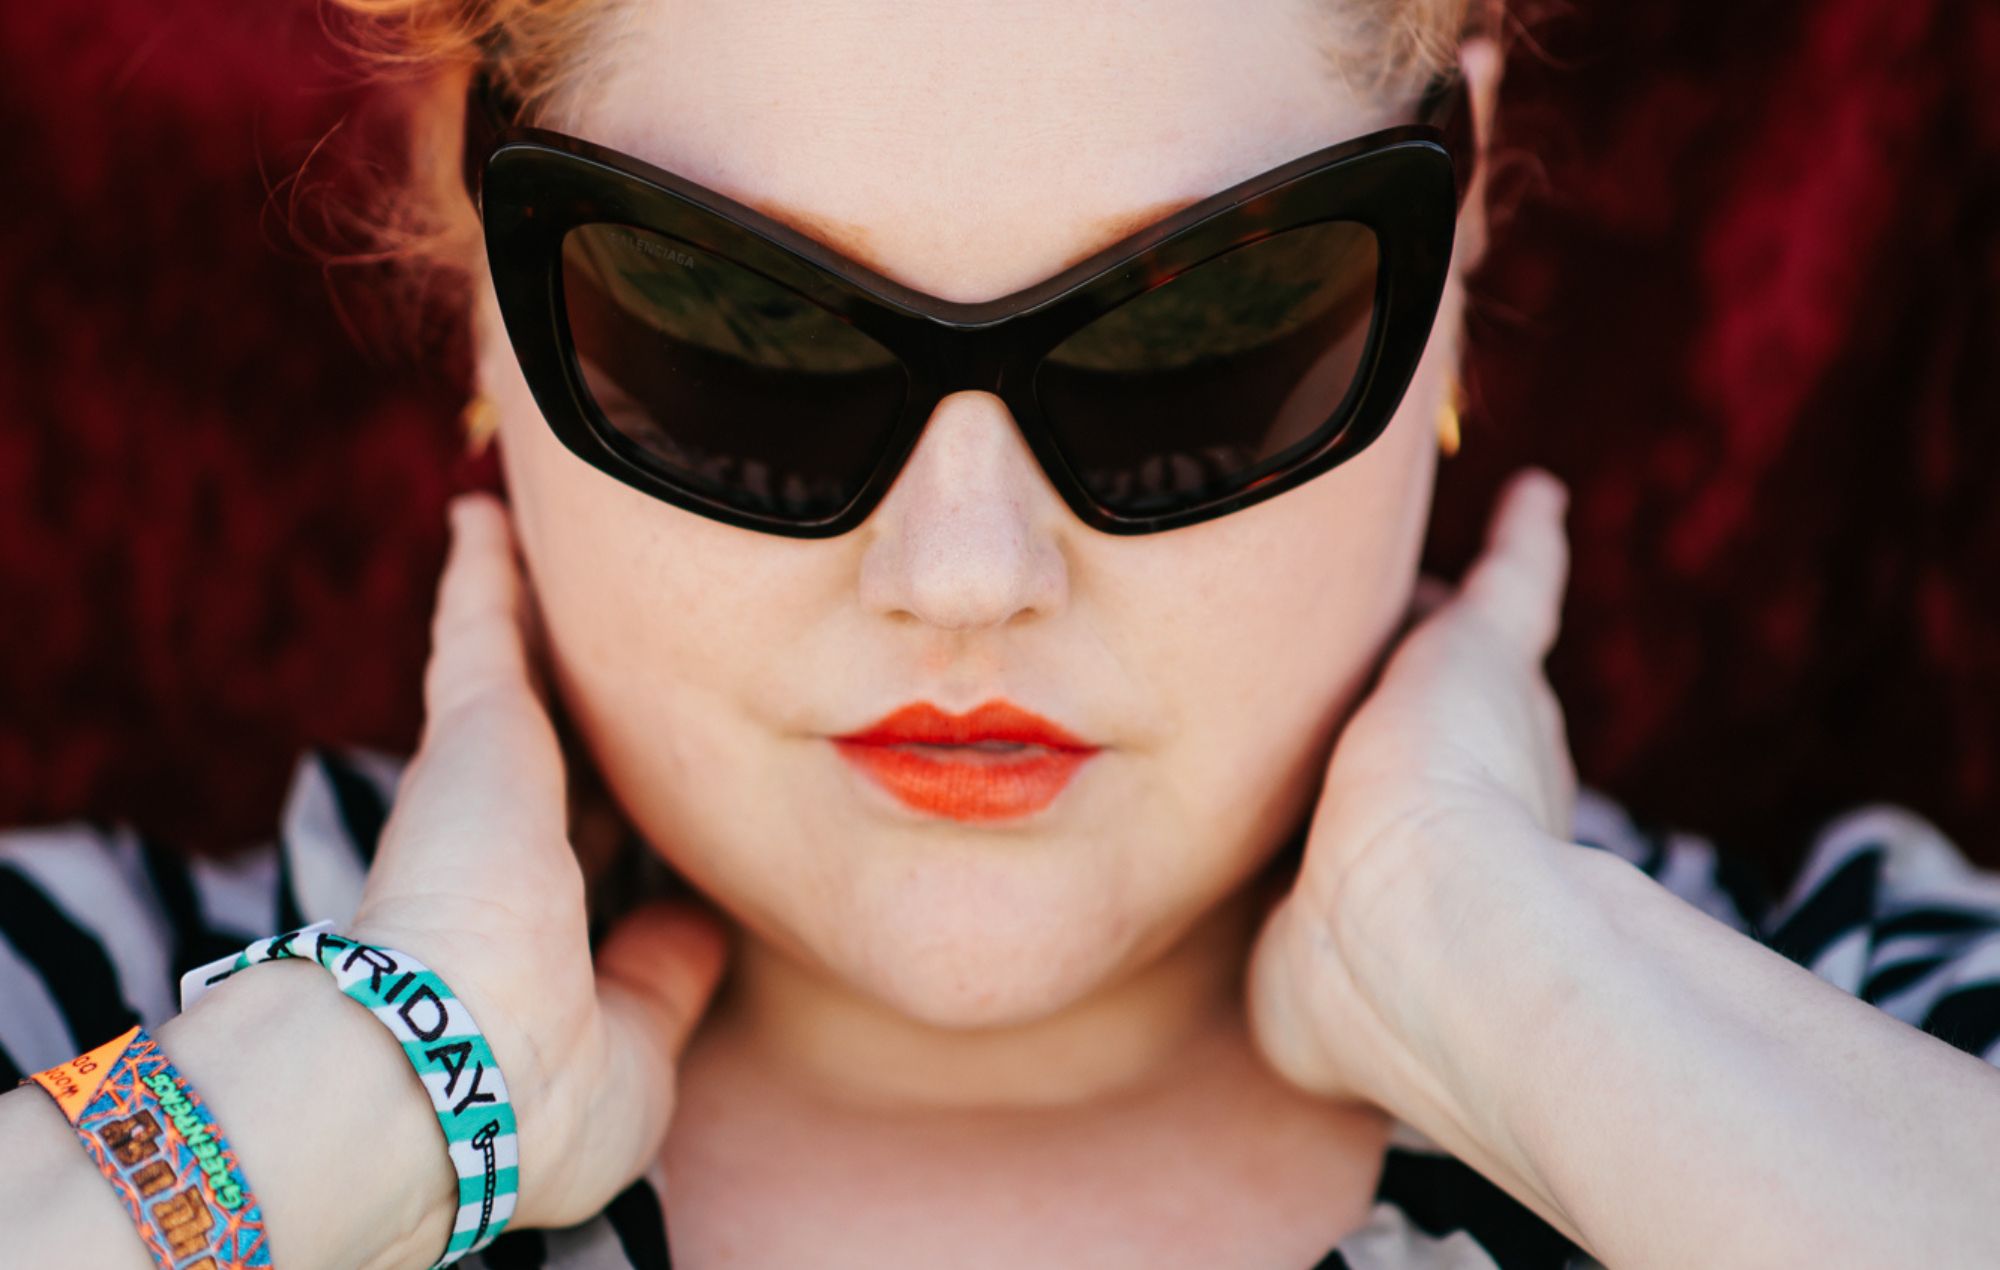 Beth Ditto of Gossip. CREDIT: Credit: Andy Ford for NME